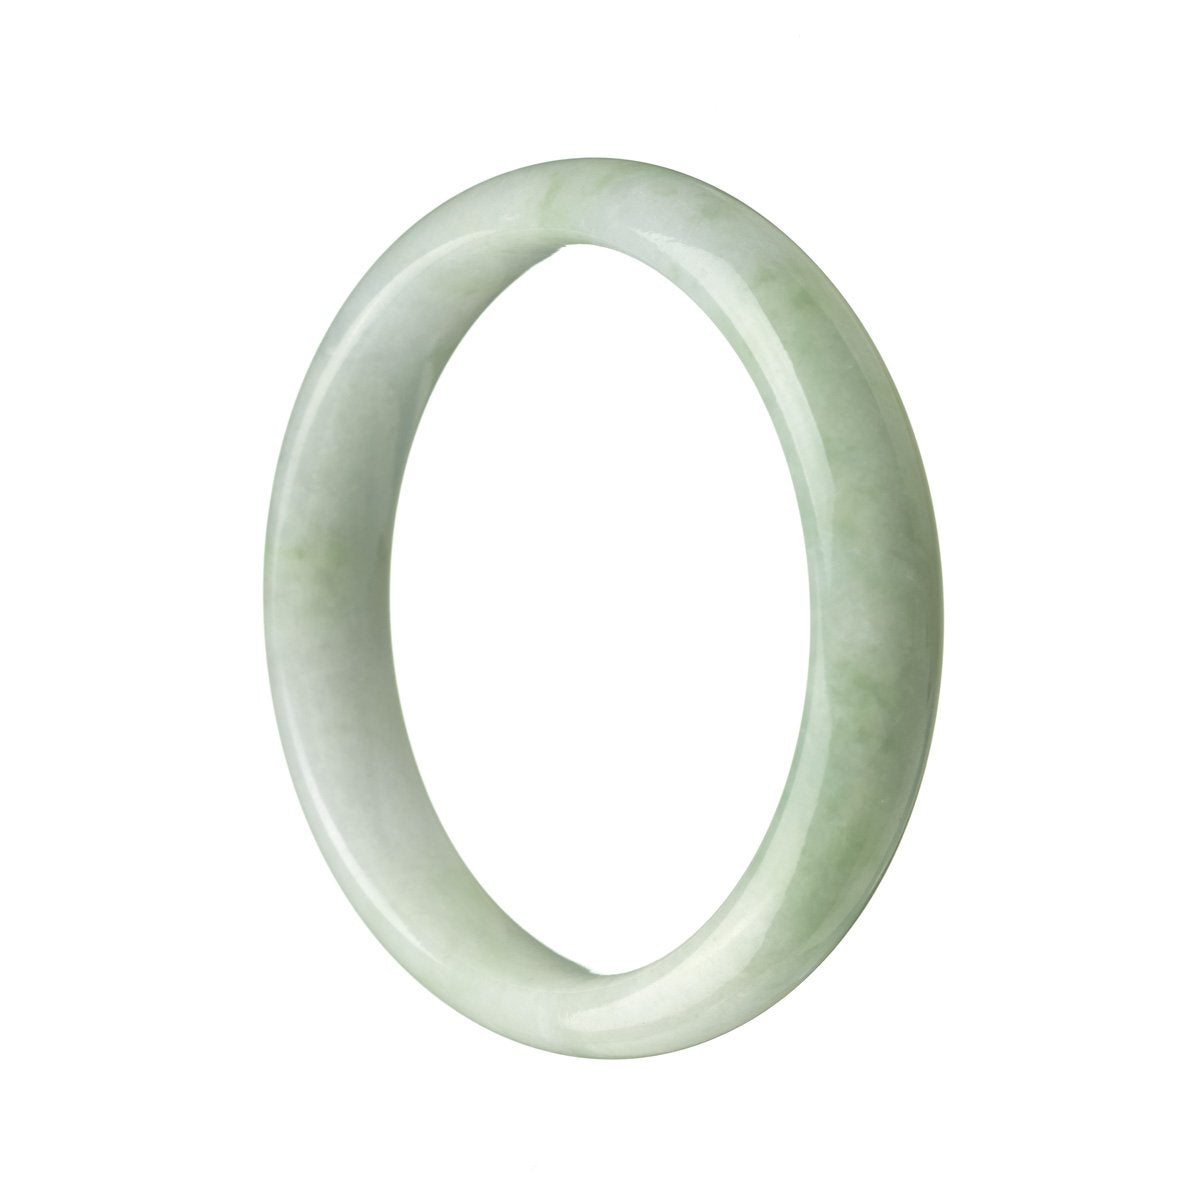 An exquisite, half-moon shaped Type A pale green lavender jadeite jade bangle measuring 57mm in diameter, sourced from MAYS GEMS.